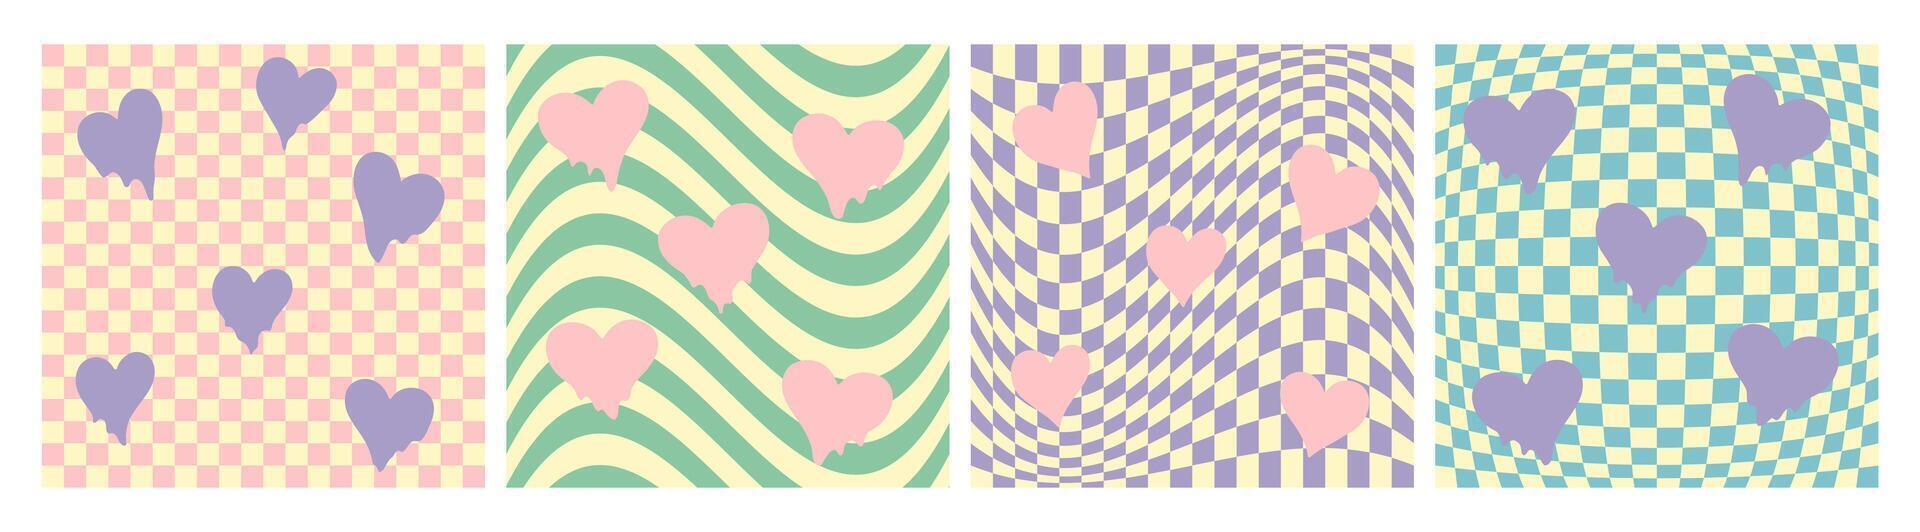 Groovy checkered patterns in pastel colors with hearts shape, vintage aesthetic backgrounds, psychedelic checkerboard texture. Funky hippie fashion textile print, pattern set. vector